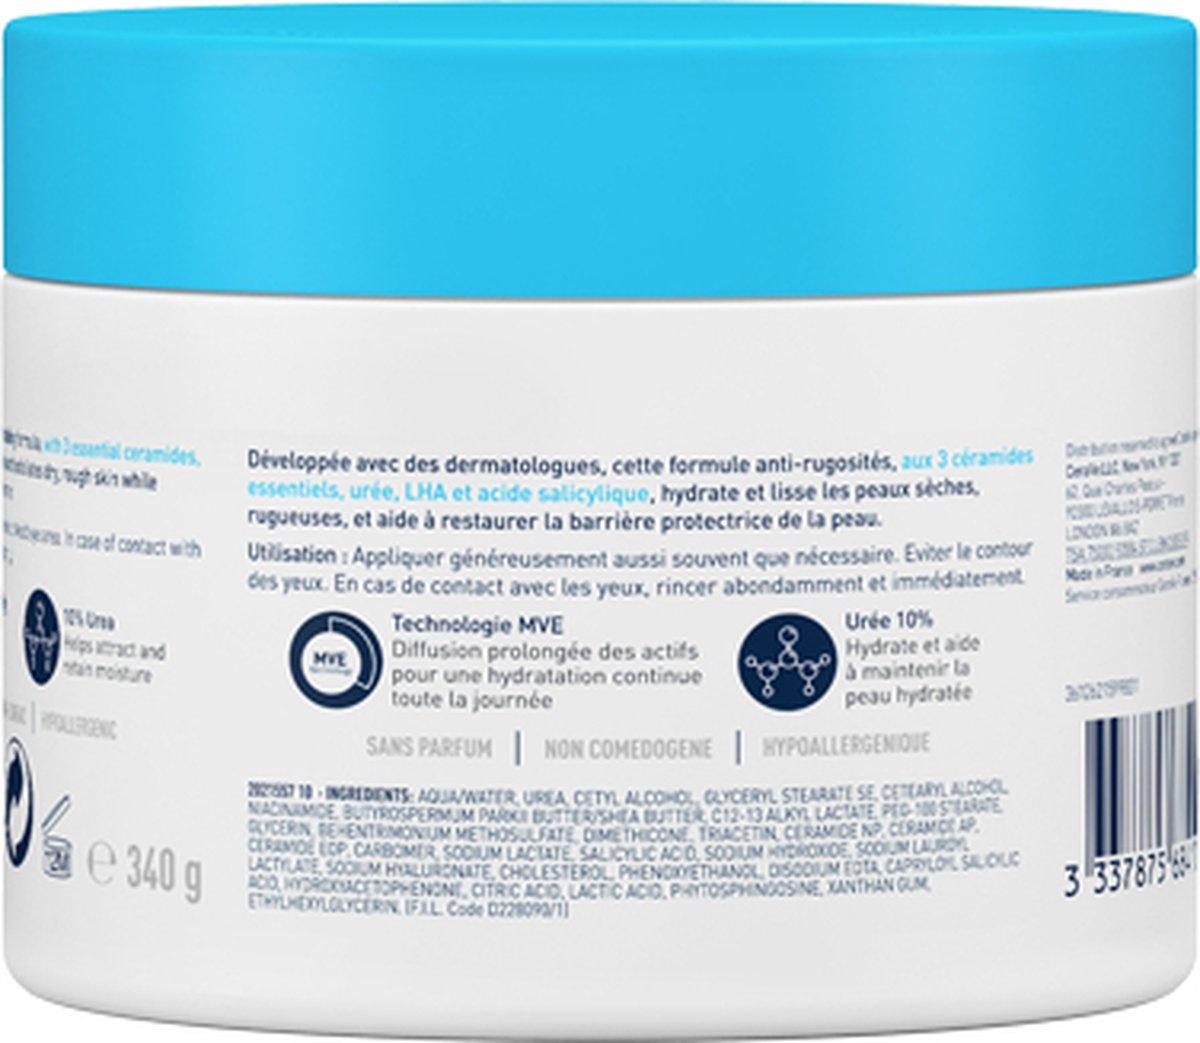 CeraVe - SA Smoothing Cream - for dry and rough skin - 340g